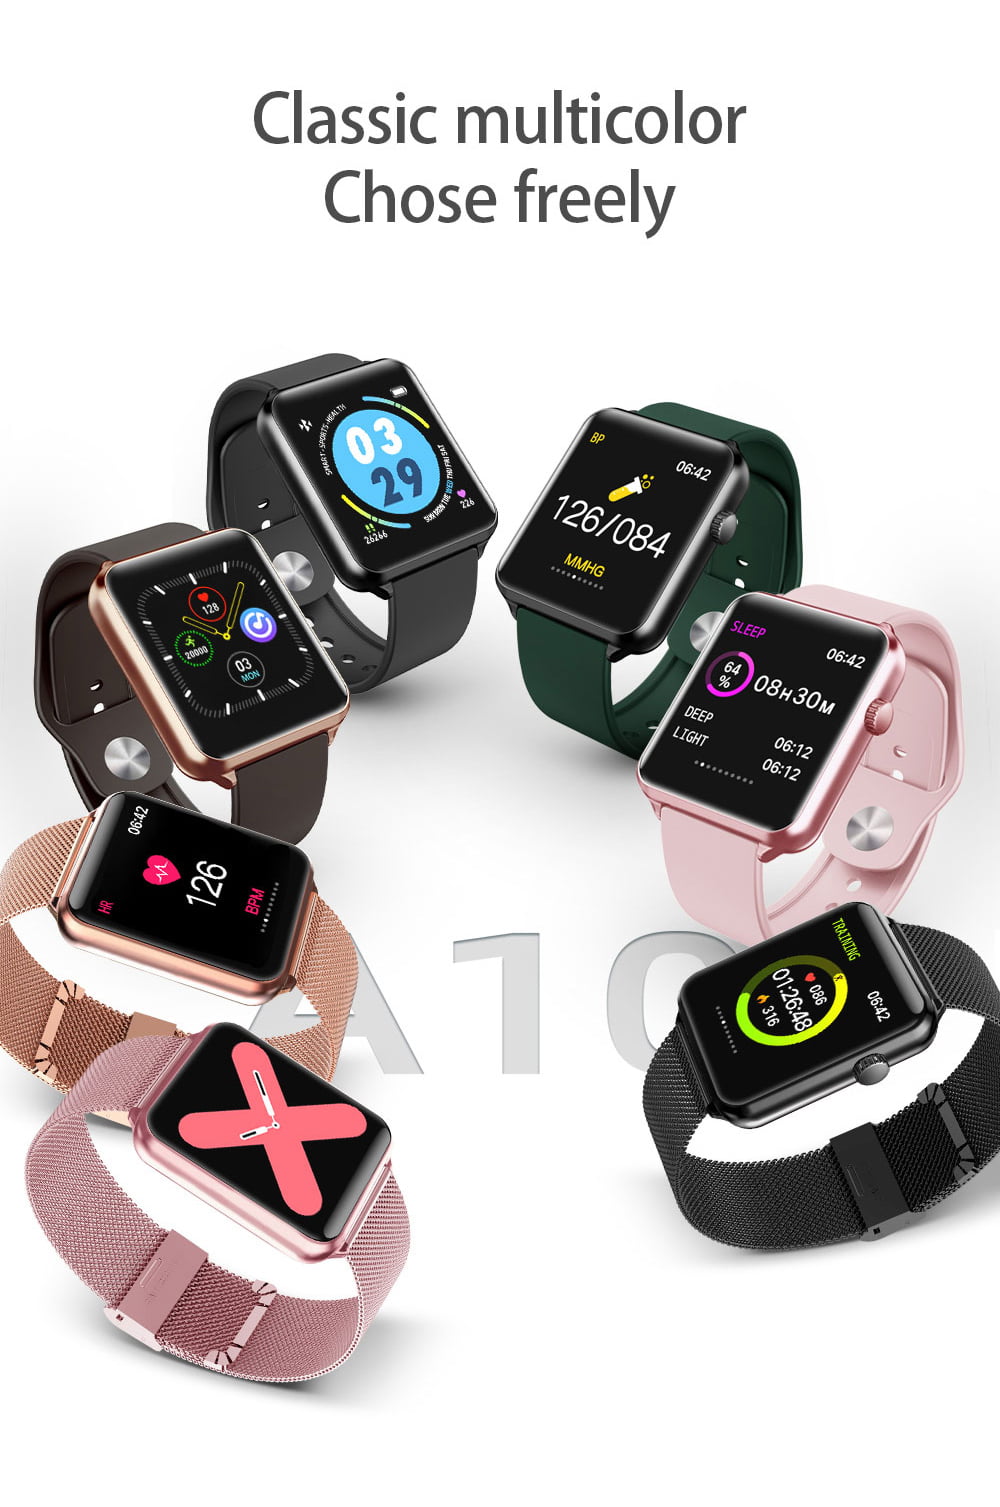 A10 1.3 inch full touch screen wristband (6)